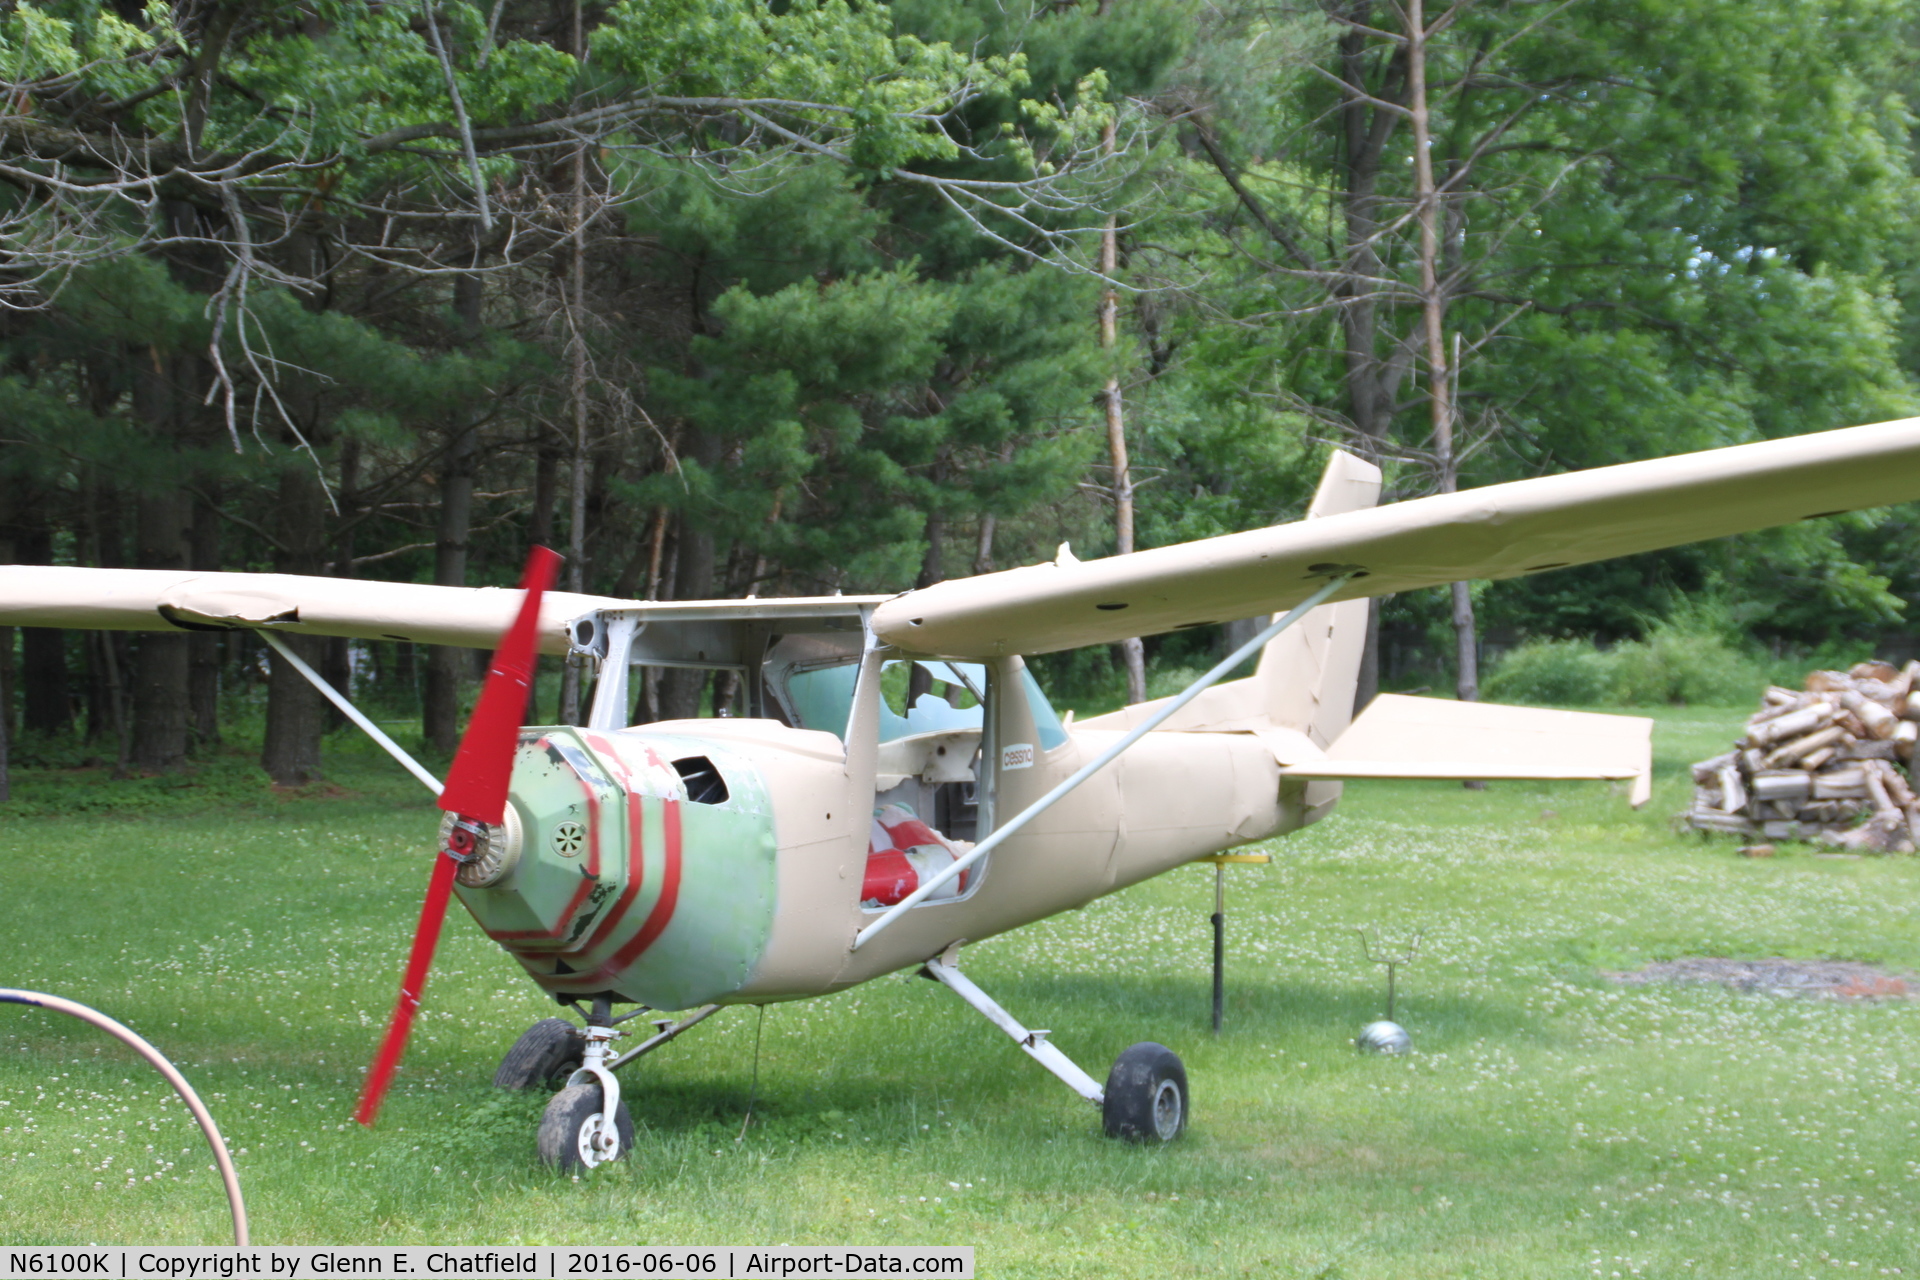 N6100K, Cessna 150M C/N 15077526, This aircraft was scrapped and cut into pieces.  The current owner purchased the scrapped airframe for use as a yard decoration.  Without a cowl, he used a barbecue section and a fan motor for the propeller.  Aircraft is gutted.  Johnson County, IA